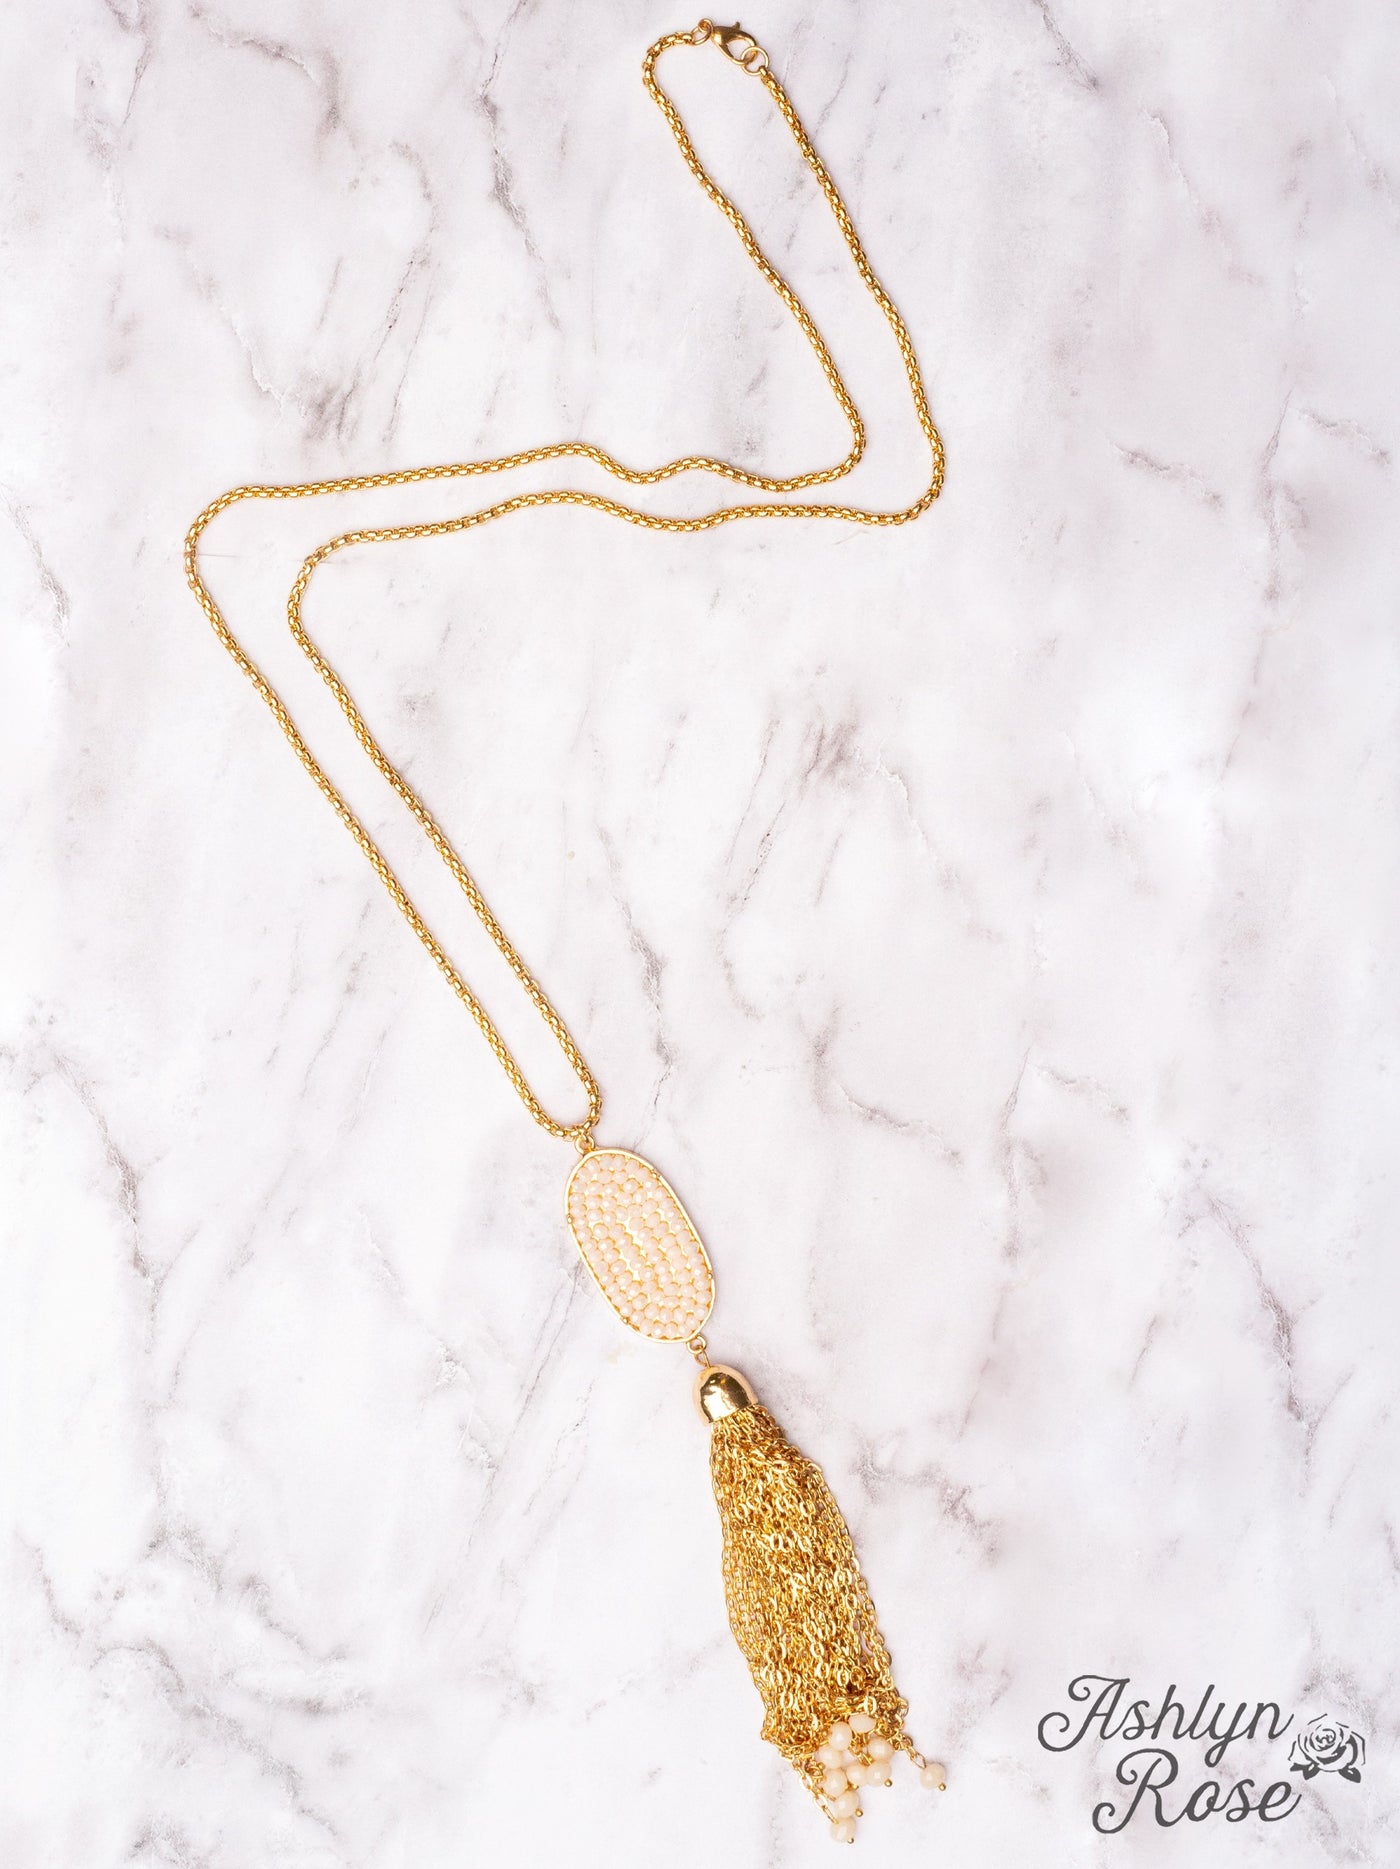 A LITTLE SPARKLE WHITE CRYSTAL OVAL PENDANT TASSEL ON A GOLD NECKLACE